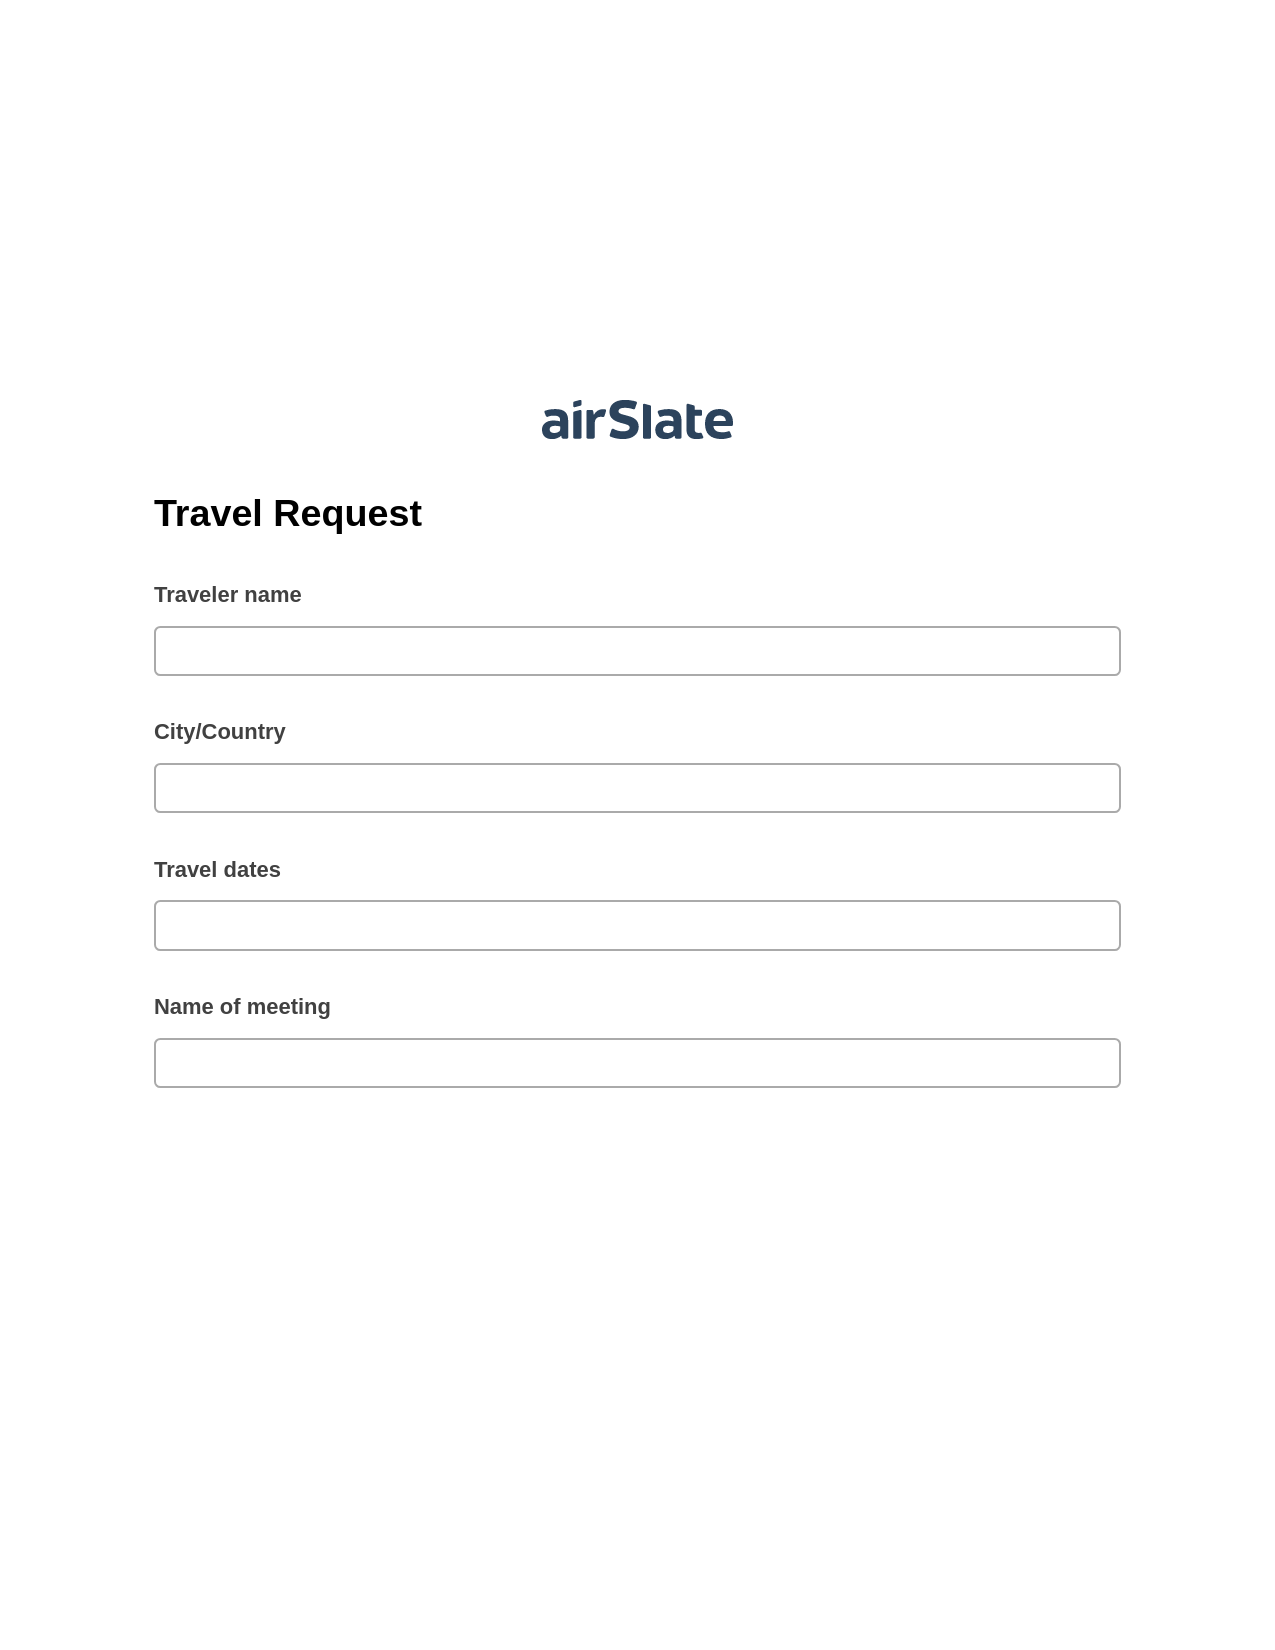 Travel Request Pre-fill Document Bot, Add Tags to Slate Bot, Export to Excel 365 Bot